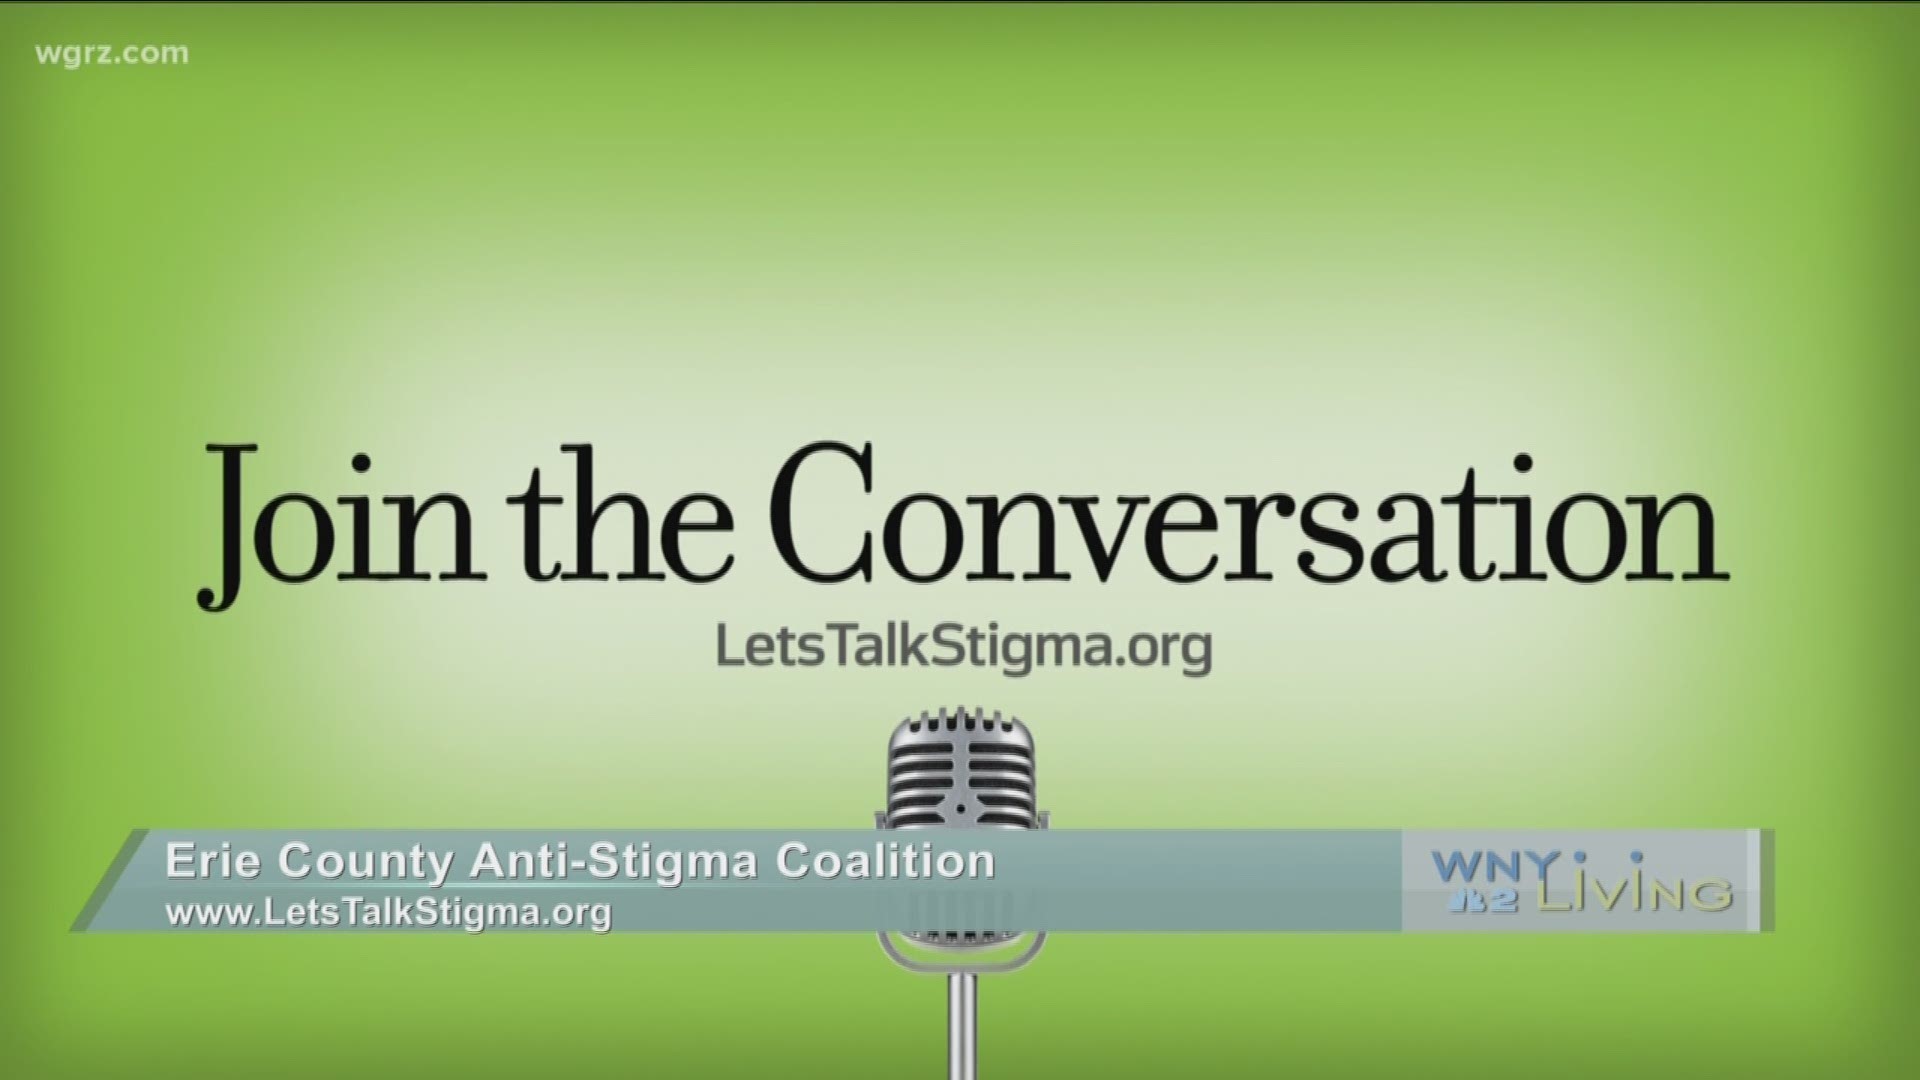 WNY Living - May 11 - Erie County Anti-Stigma Coalition (SPONSORED CONTENT)